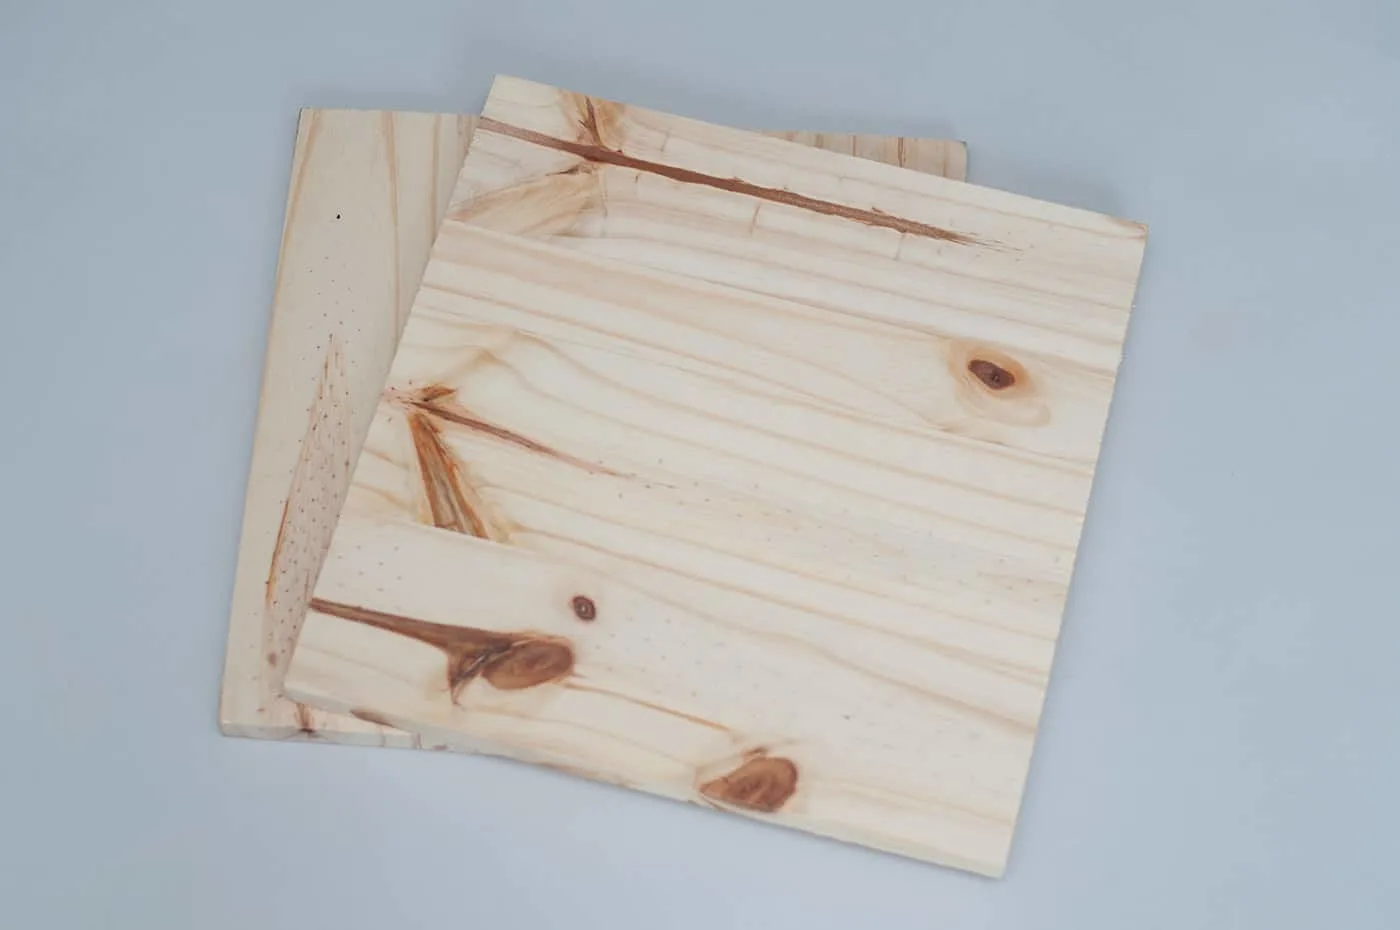 Two wood boards that are 12" square sitting on top of each other